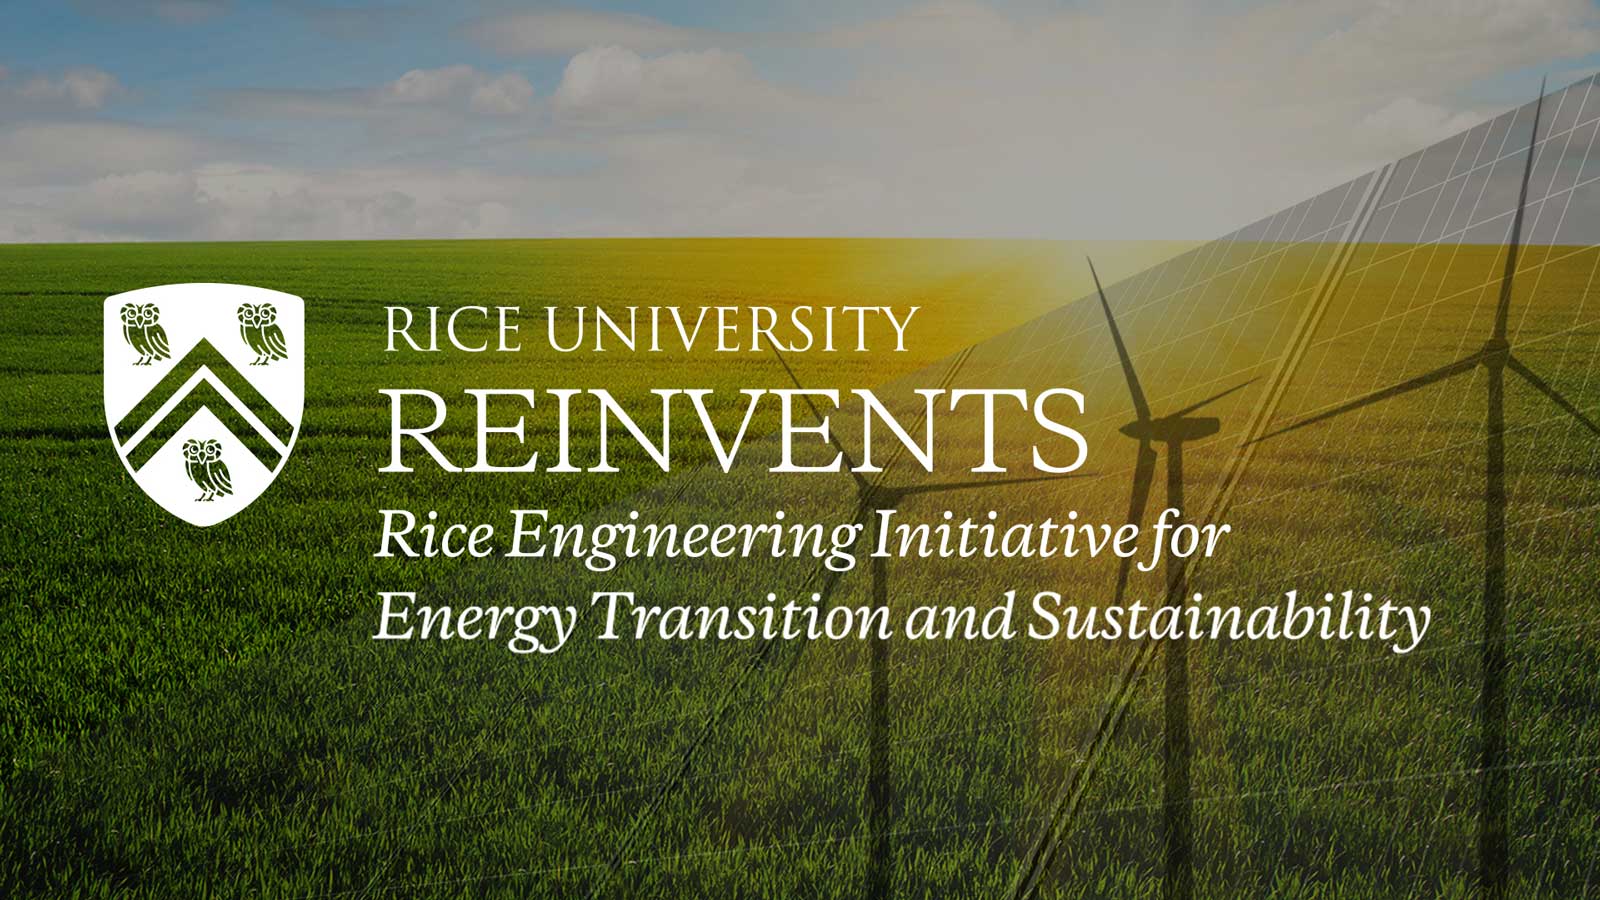 Rice Engineering INitiatiVe for ENergy Transition and Sustainability